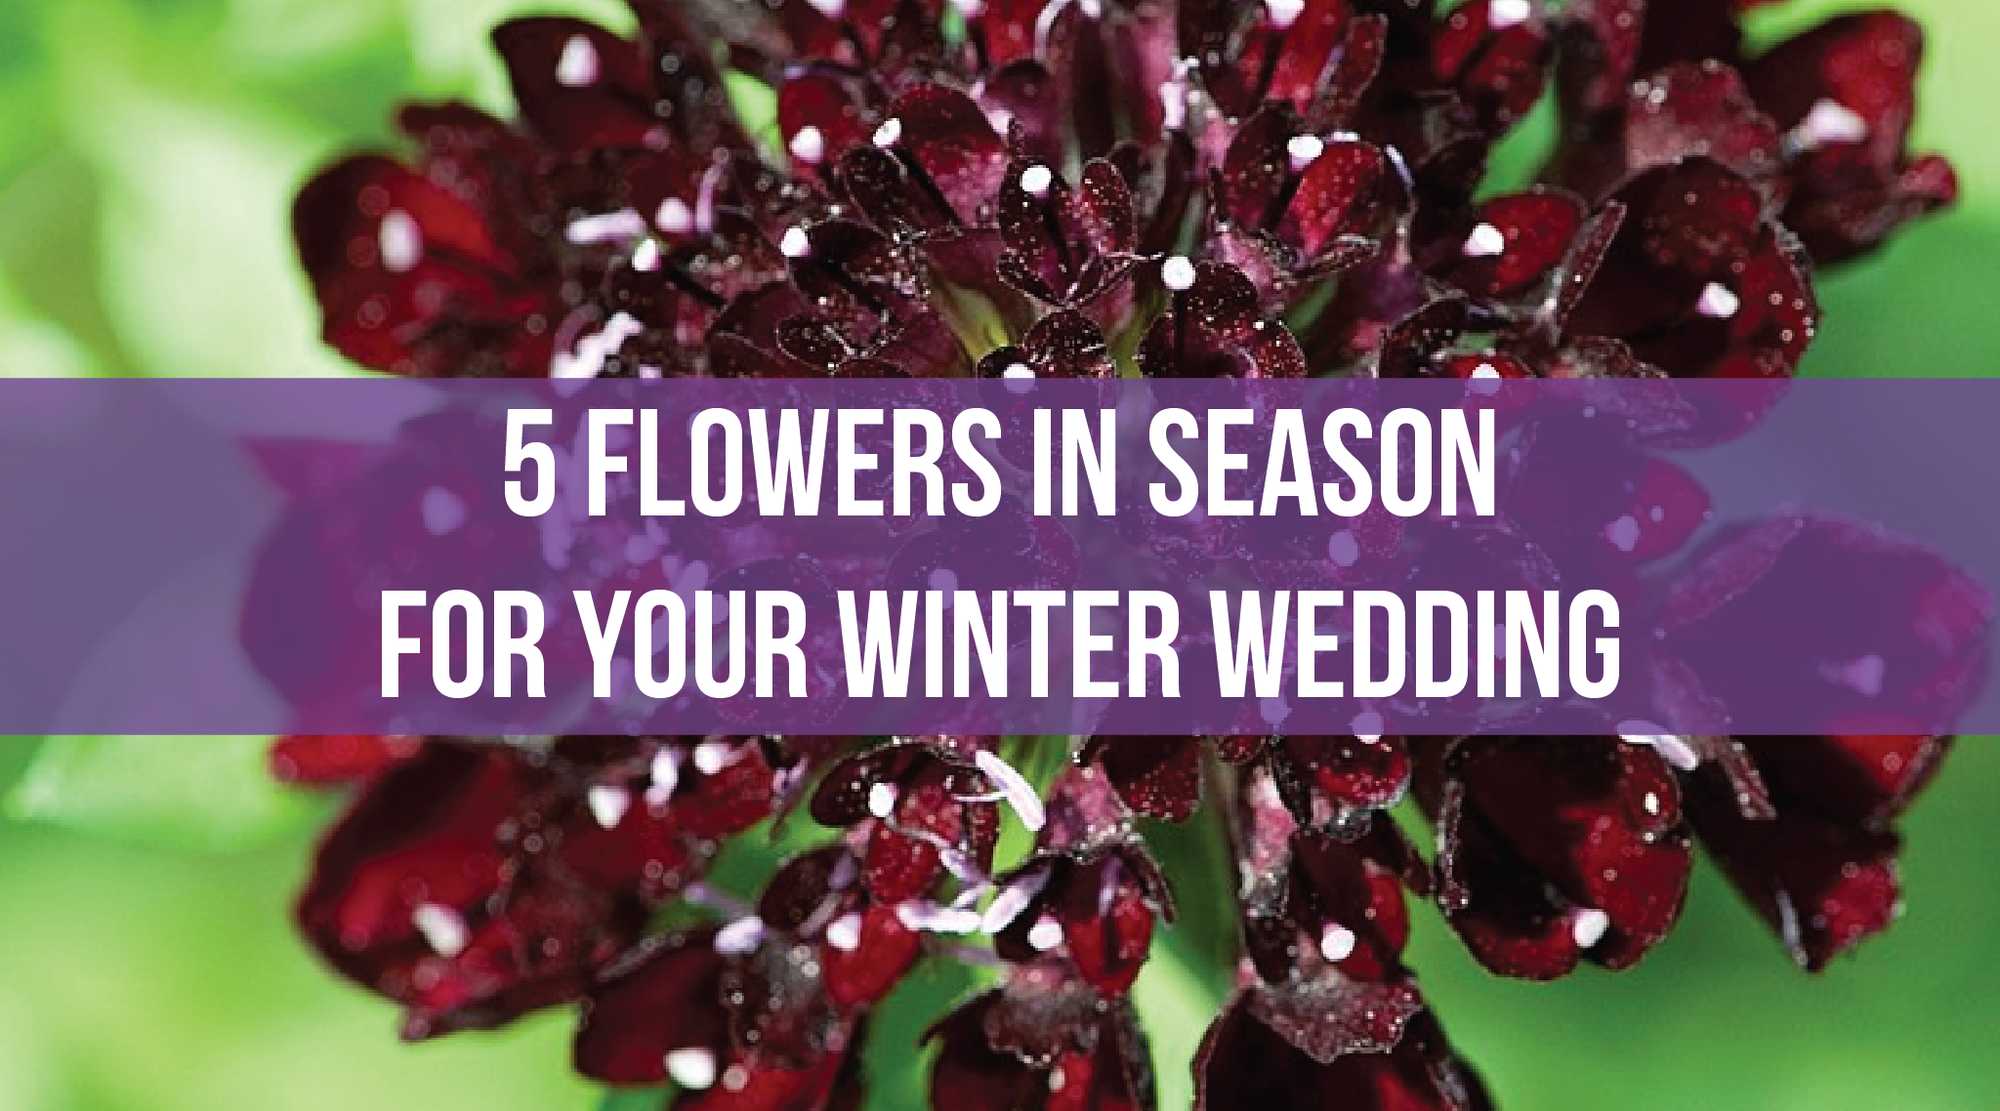 5 Flowers in Season for your Winter Wedding